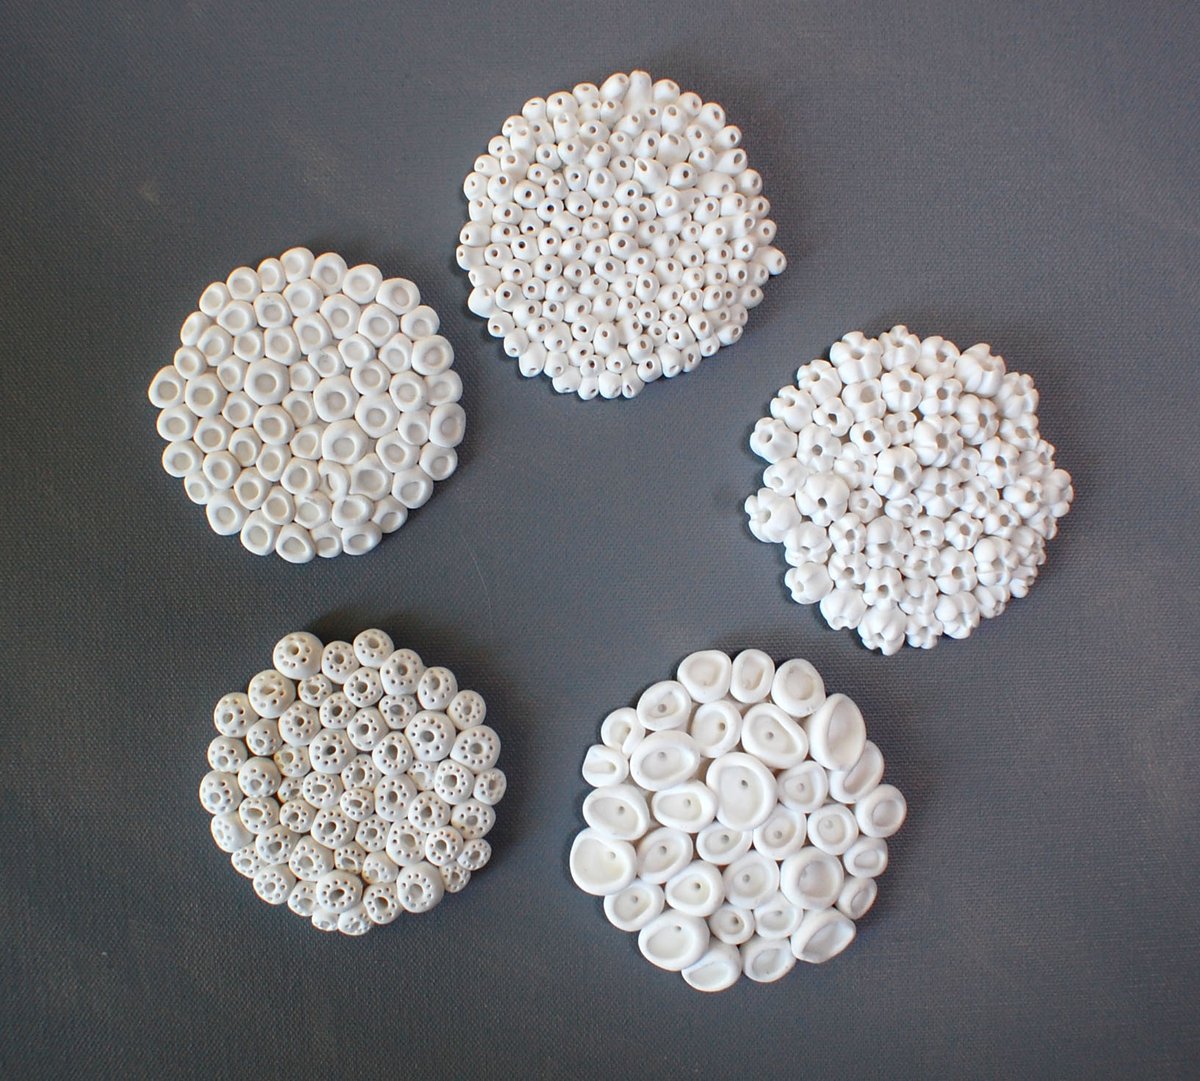 The white coral wall sculptures wall art set of 5 is the perfect accent for a beach house or perhaps a bathroom with an ocean inspired theme.The barnacles, finger coral and more are all inspired by endangered coral. etsy.me/3leOPa6 #coral #coralreef #reefart #art